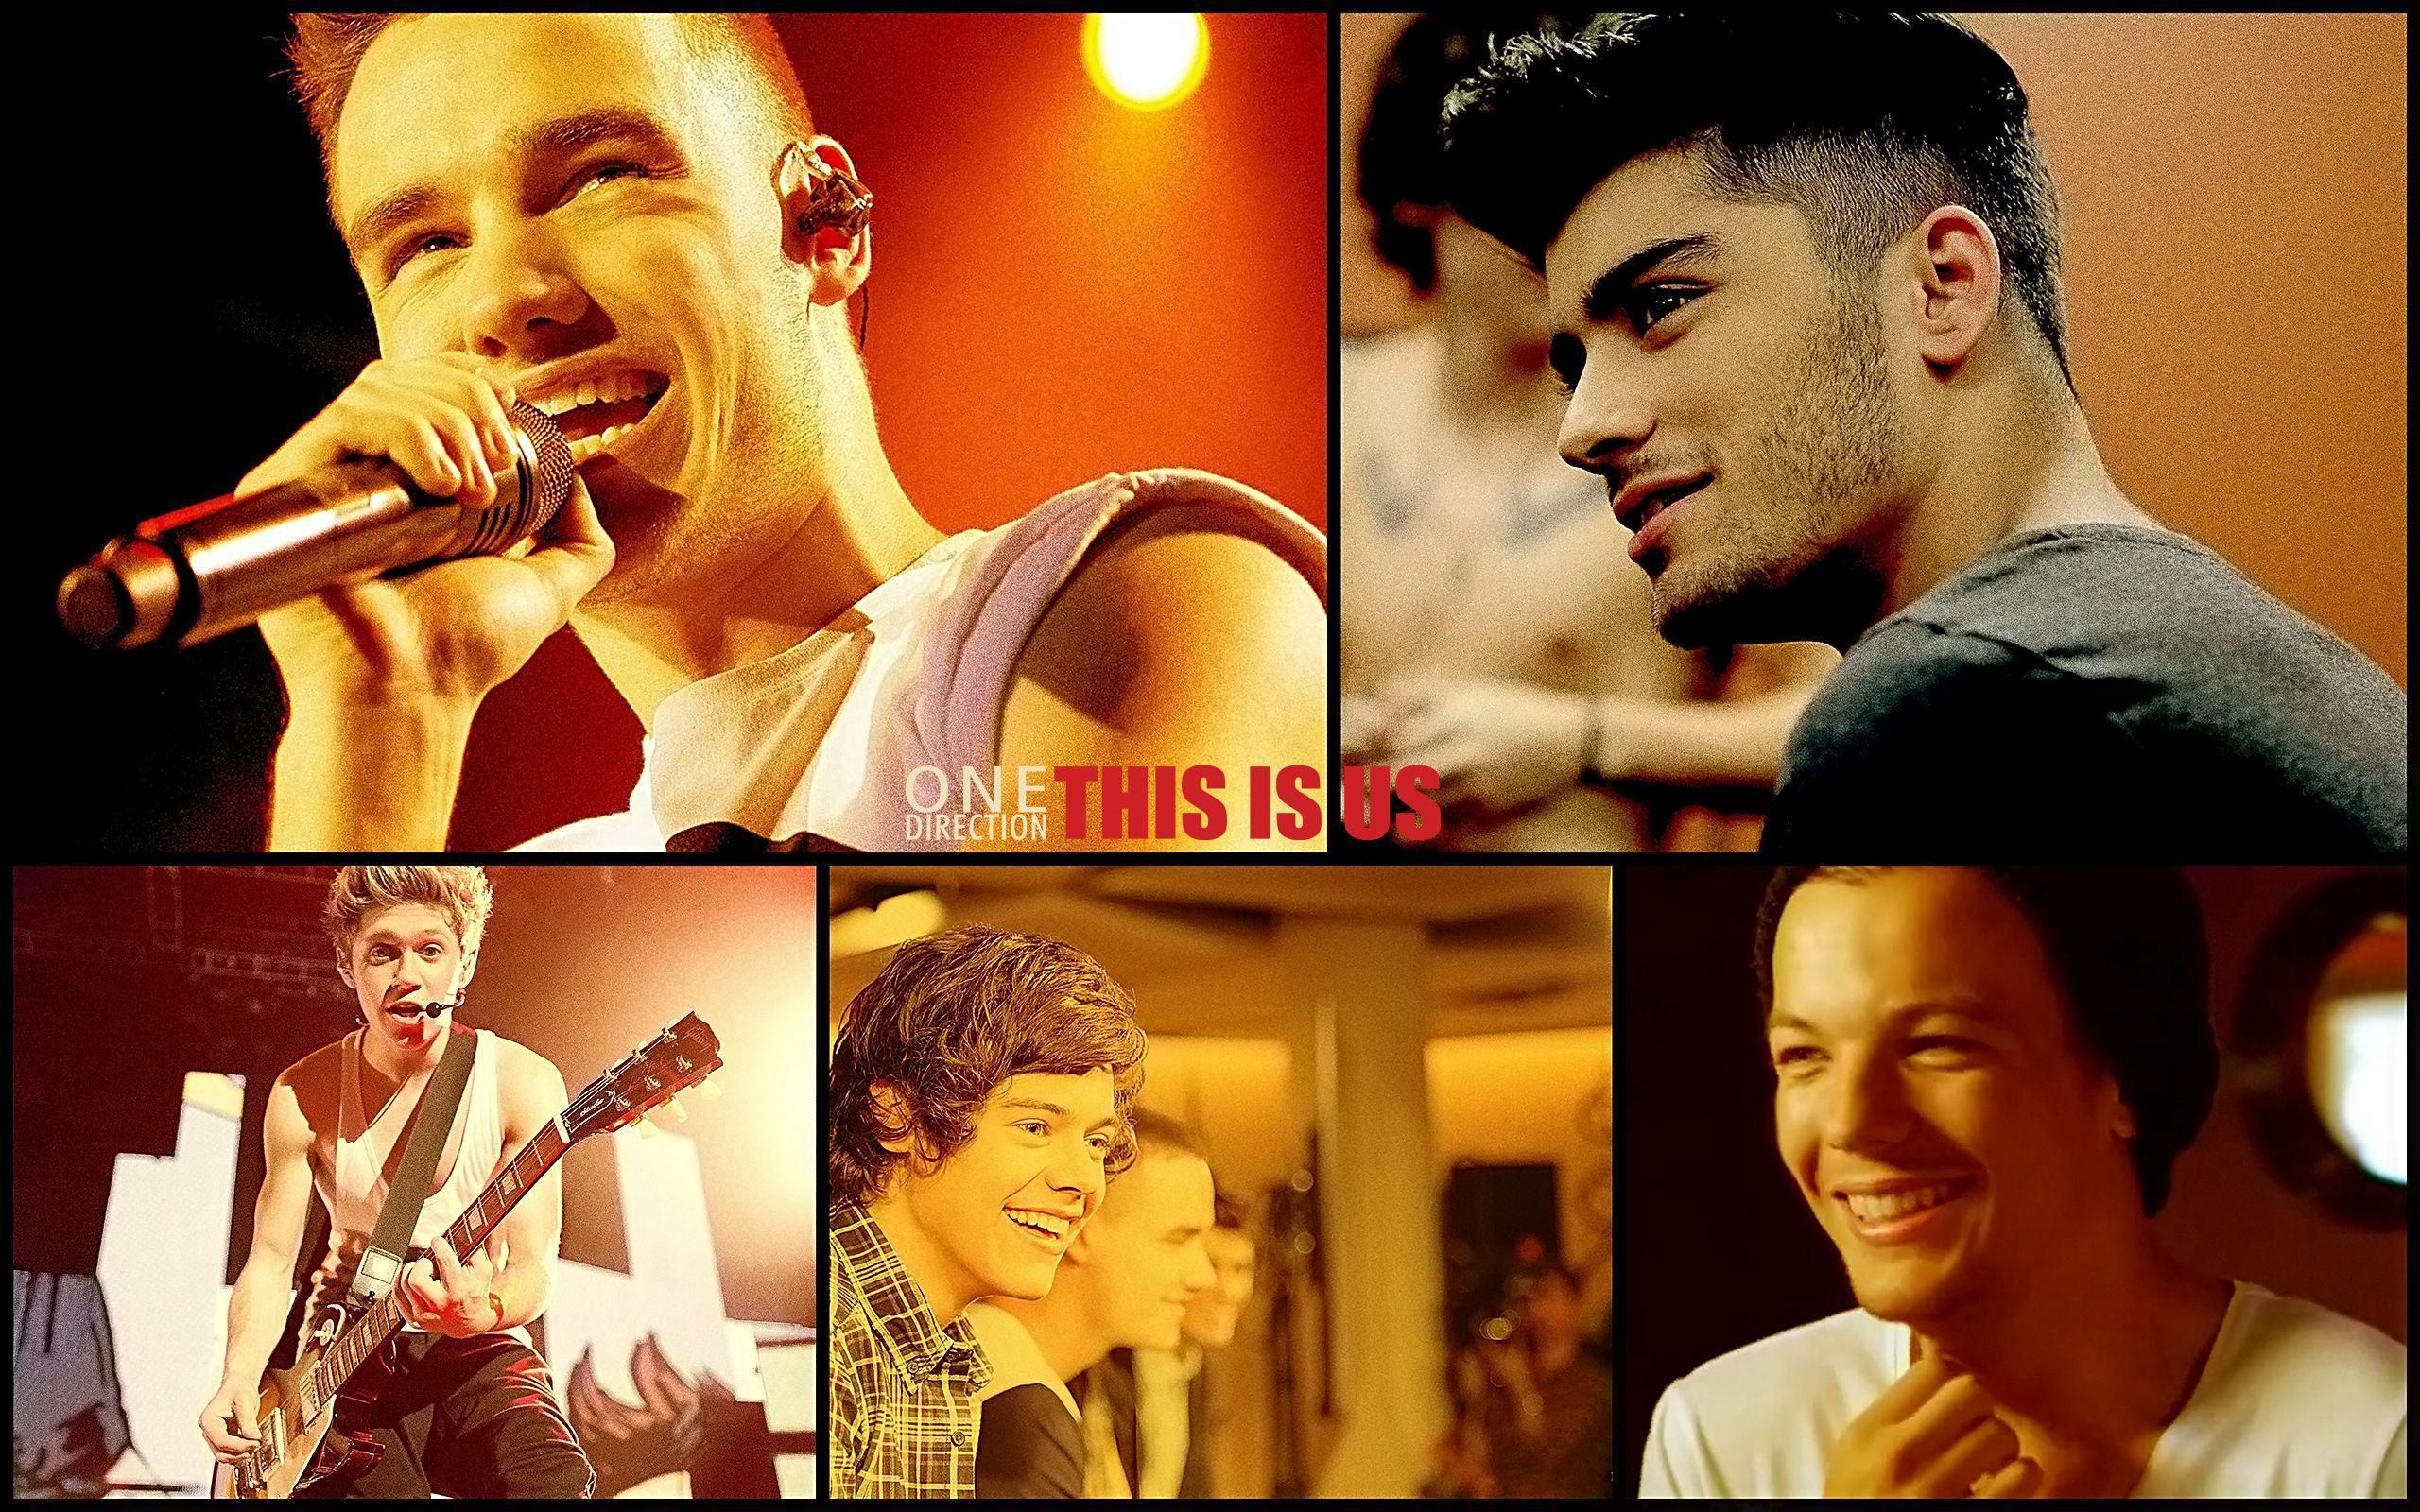 One Direction movie Is Us Official wallpaper. Movie